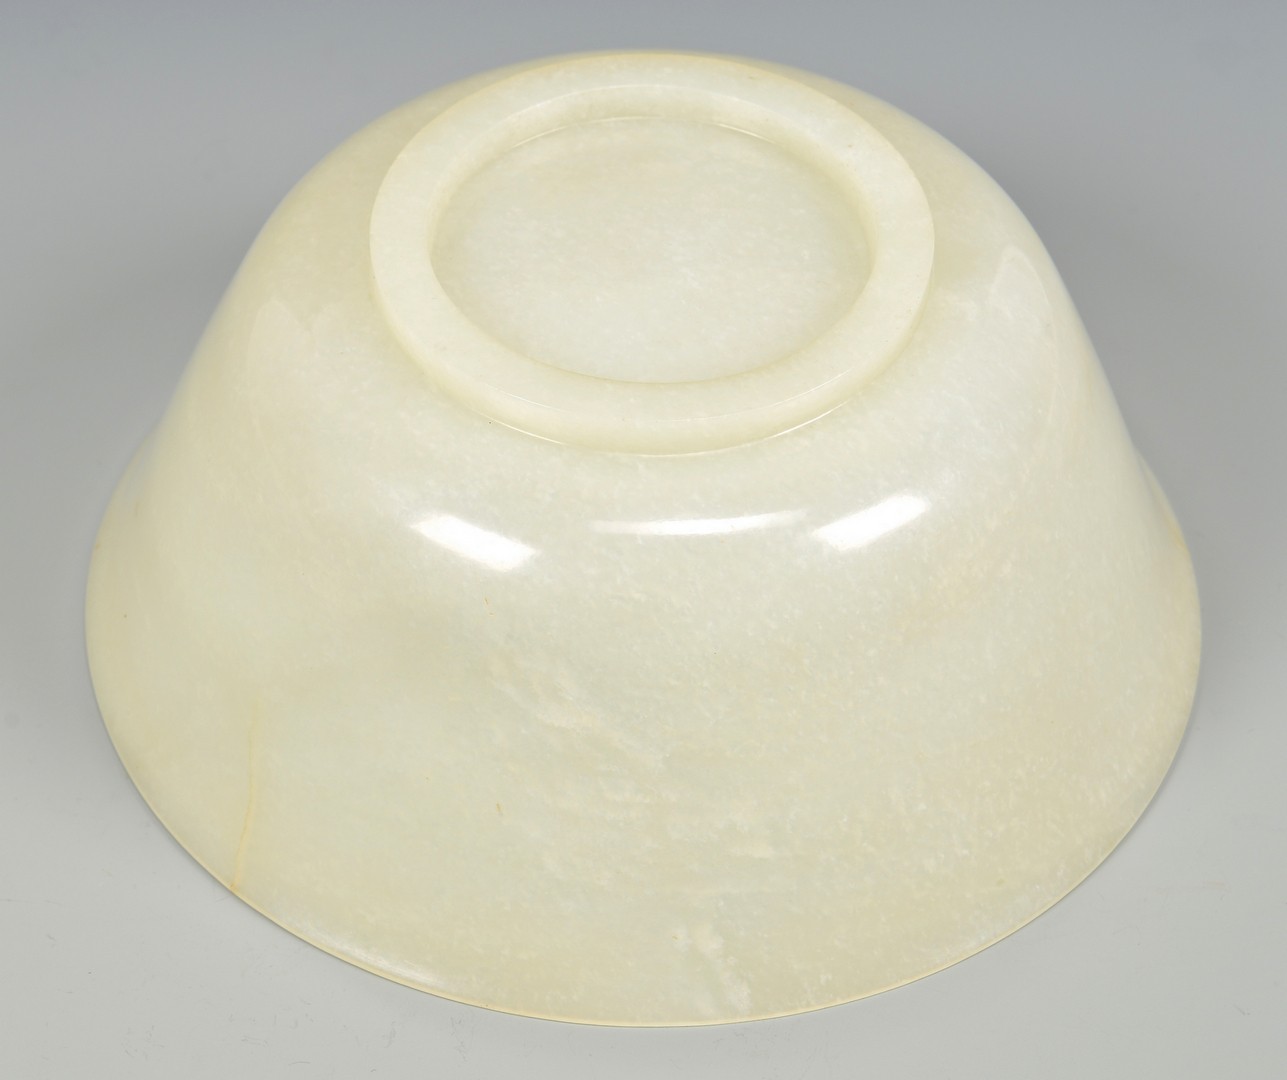 Lot 4: White Jade Bowl, Ch’ien Lung